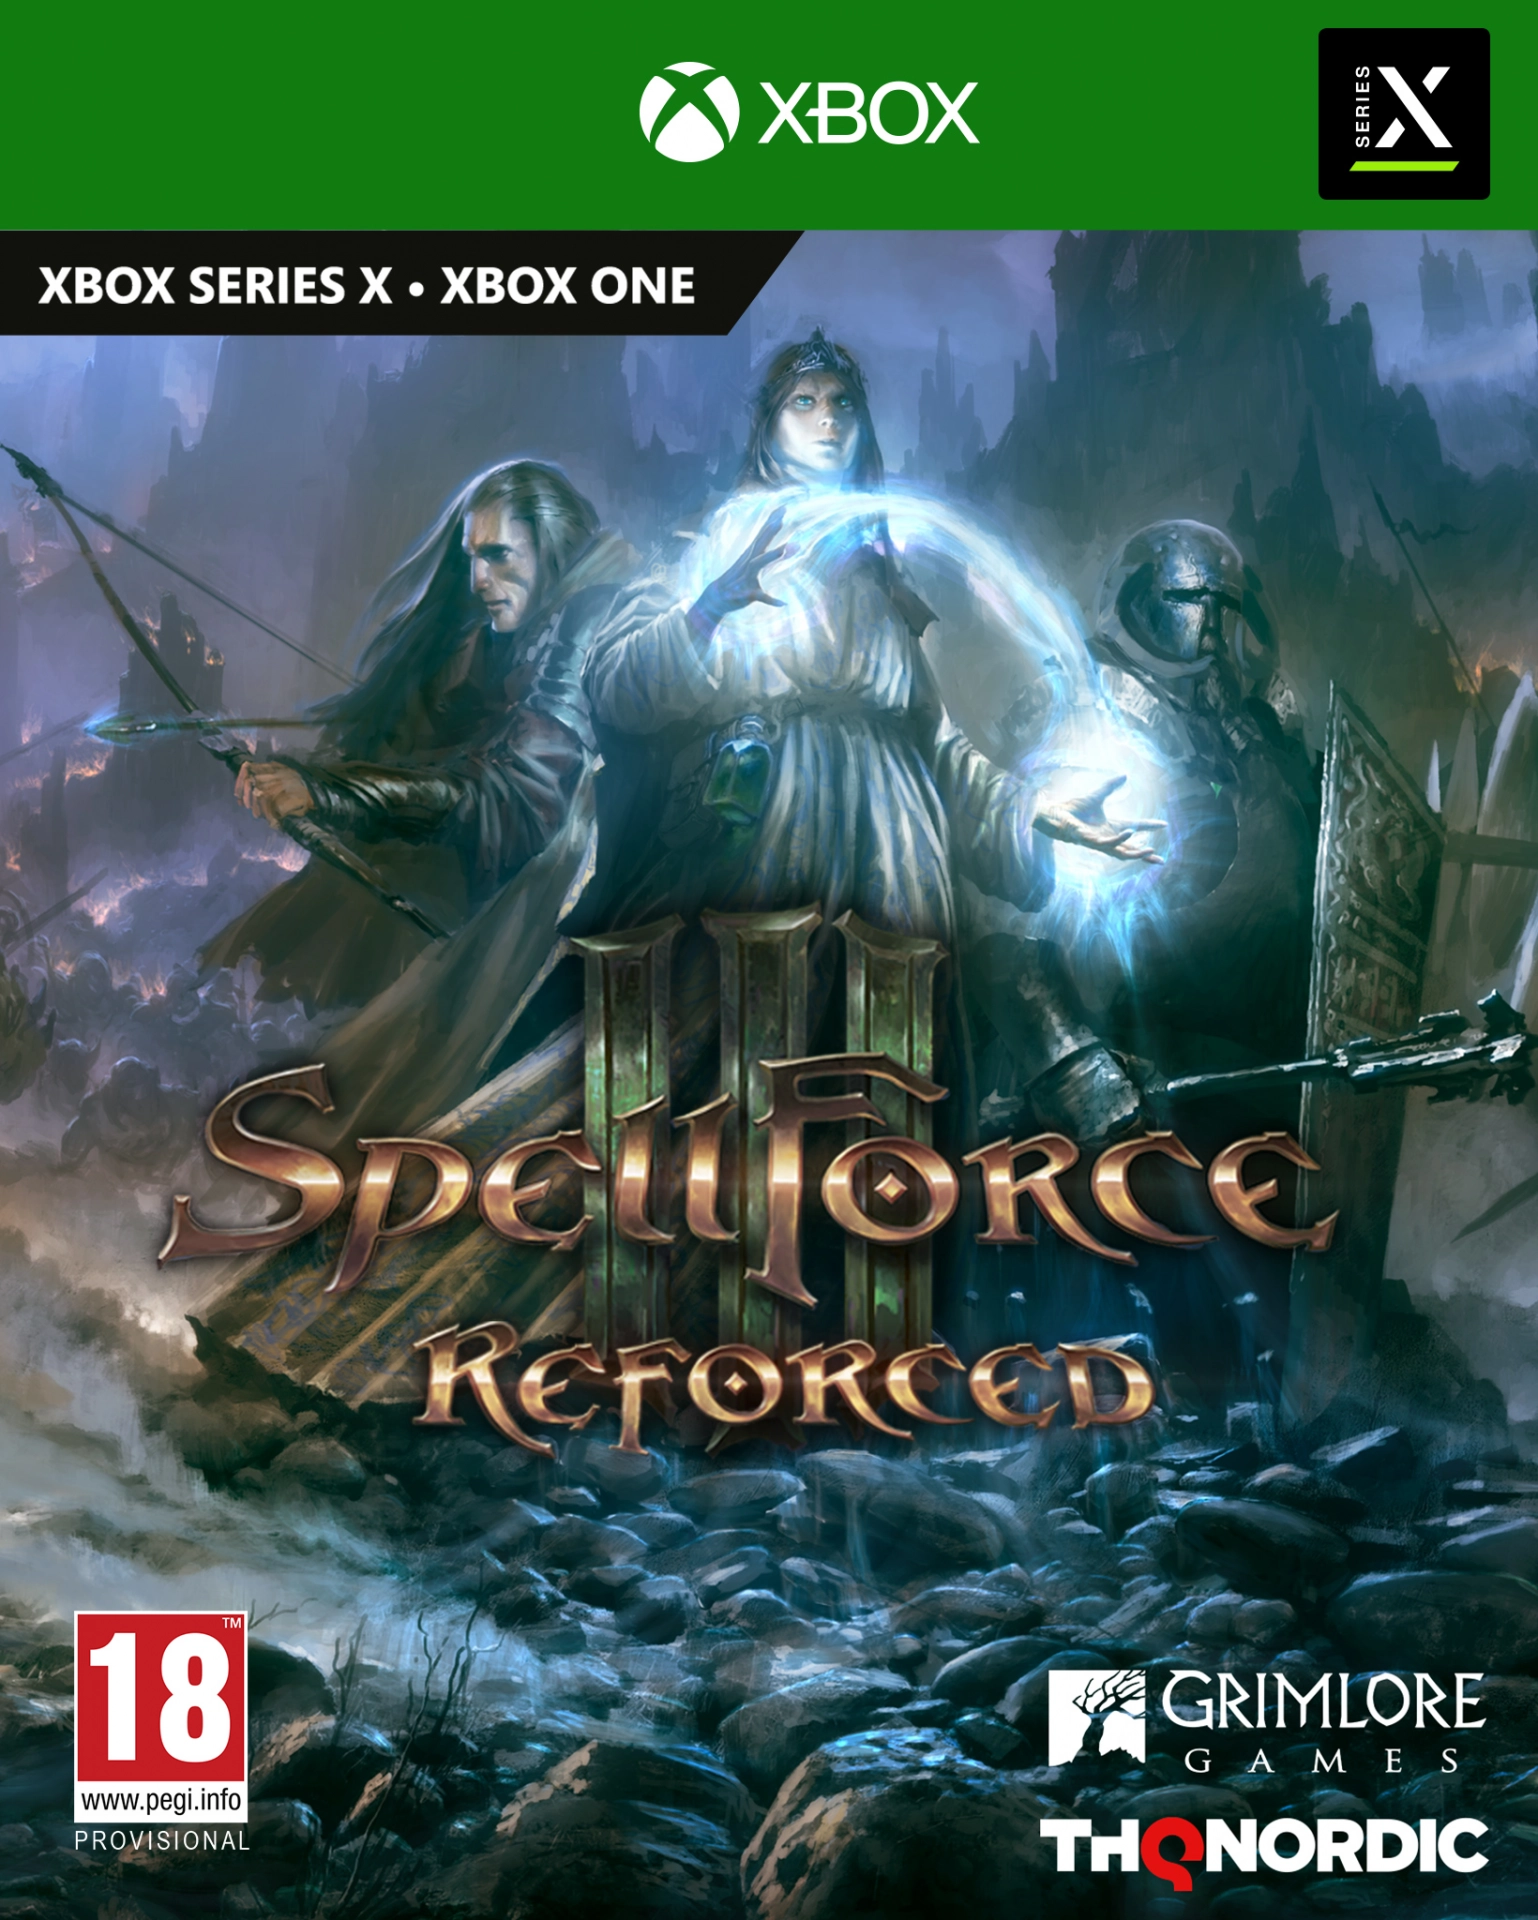 Spellforce 3: Reforced (Xbox Series X), Grimlore Games